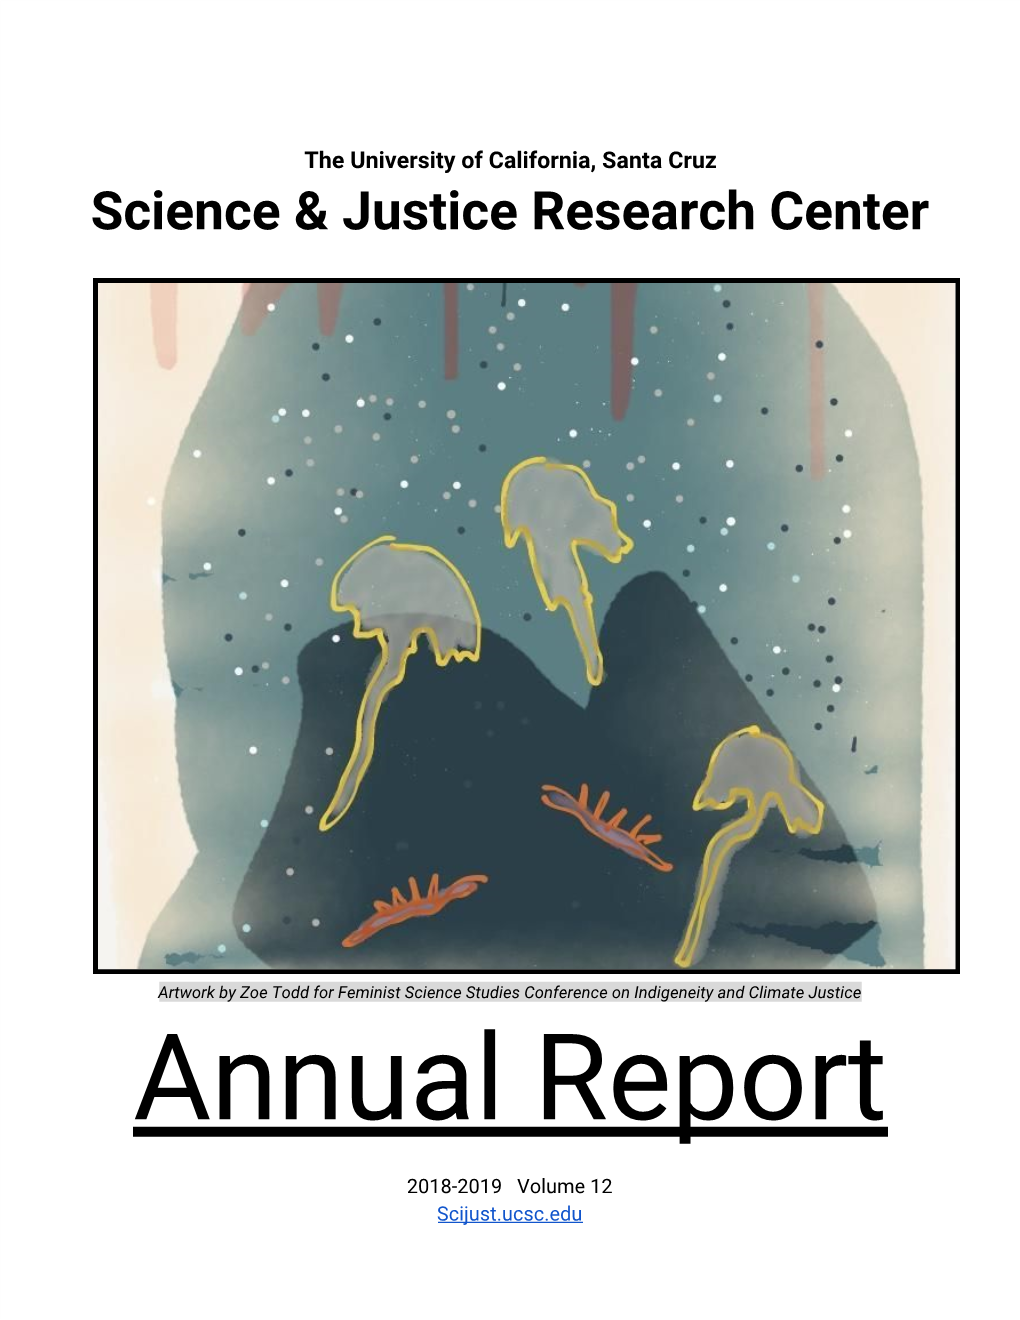 2018-2019 SJRC End of Year Report